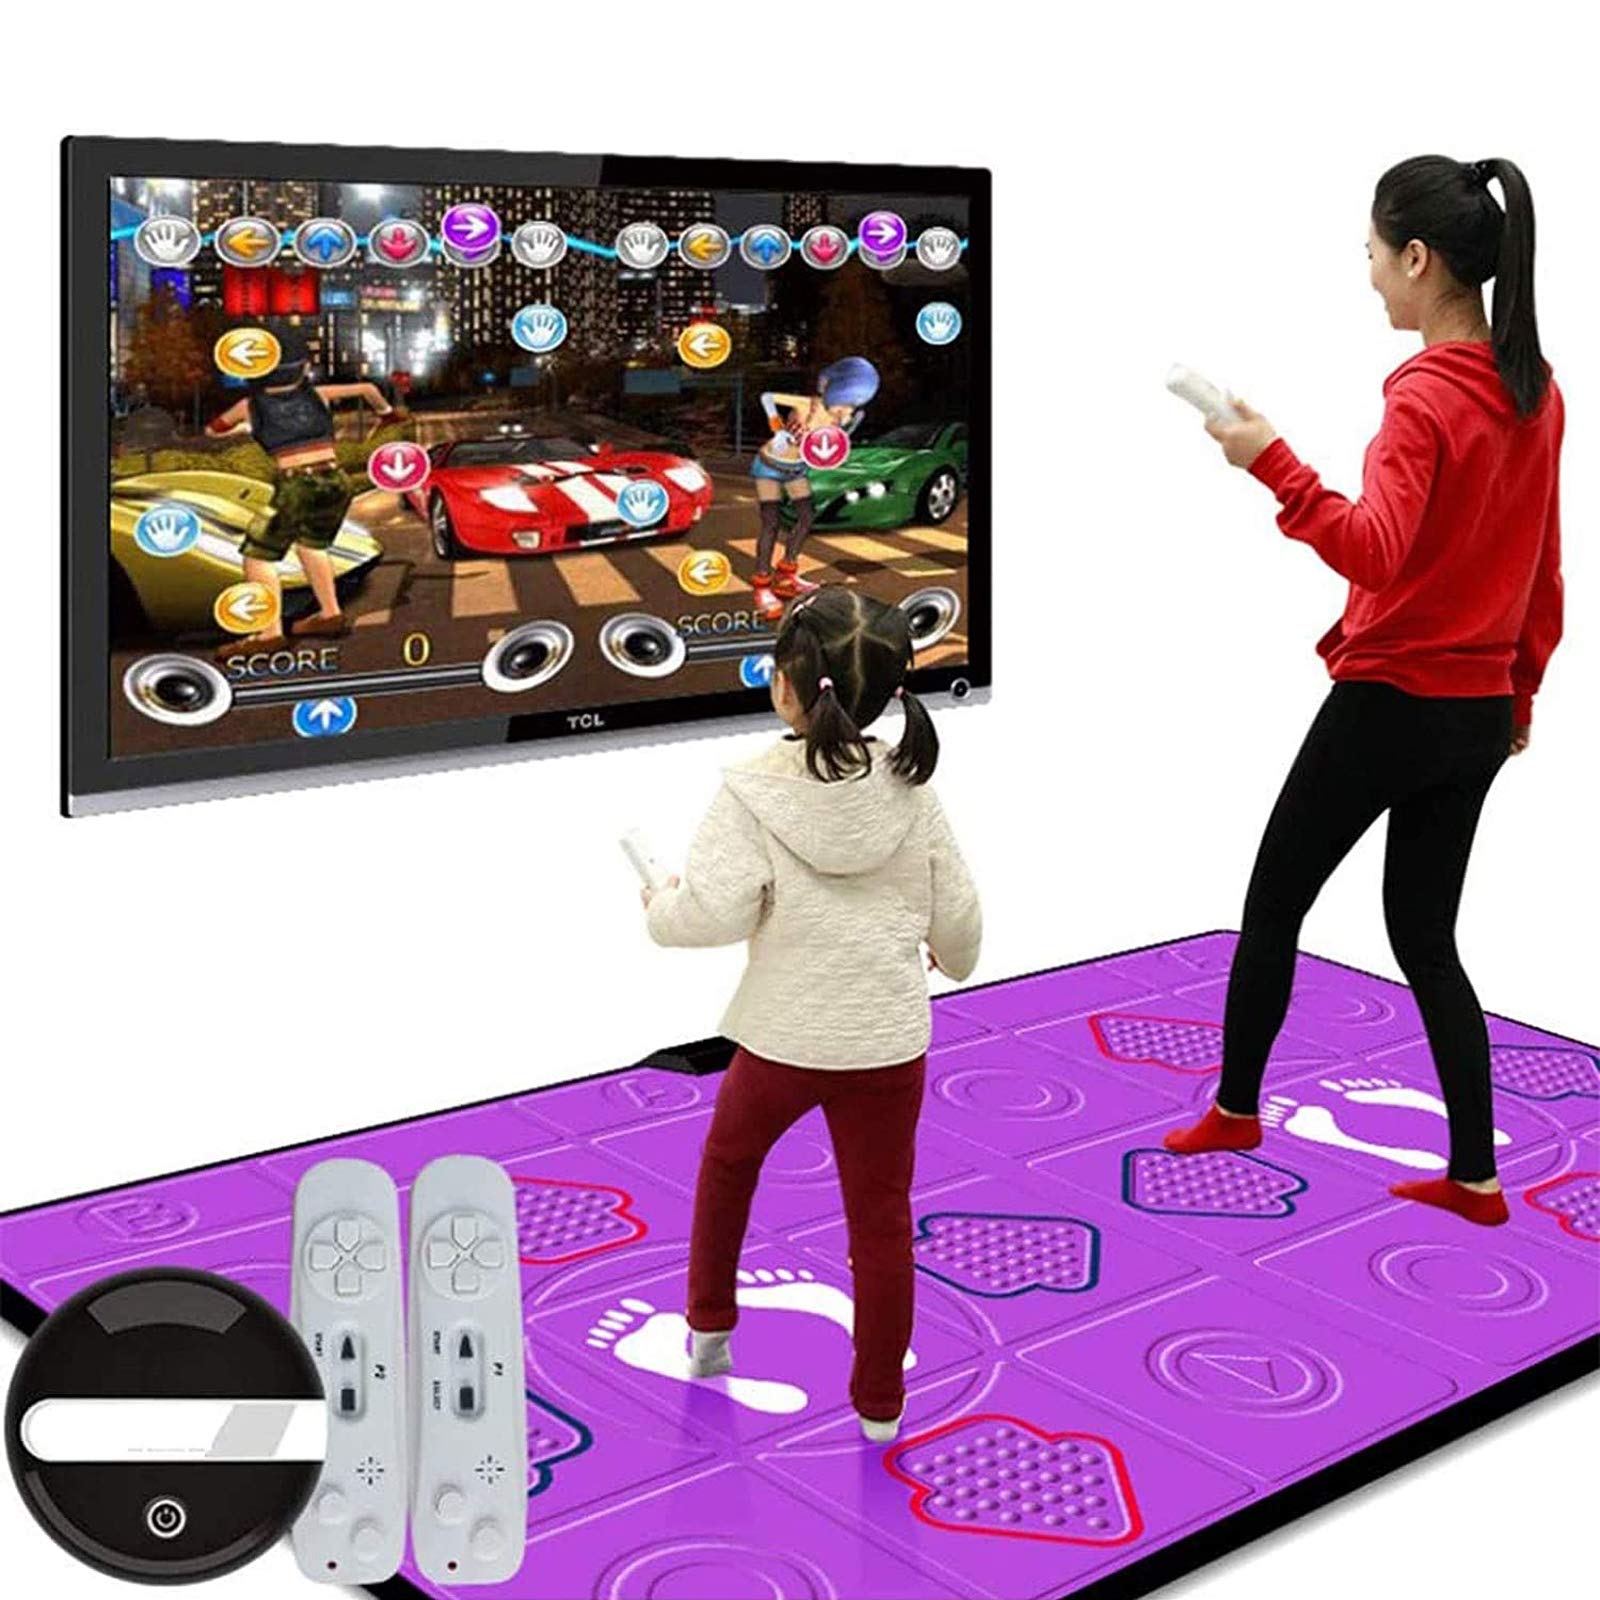 Wgwioo Double Dance Mat, Non-Slip Musical Play Mat Dancing Step with Remote Control, Jogging Yoga Game Carpet for Adults/Children